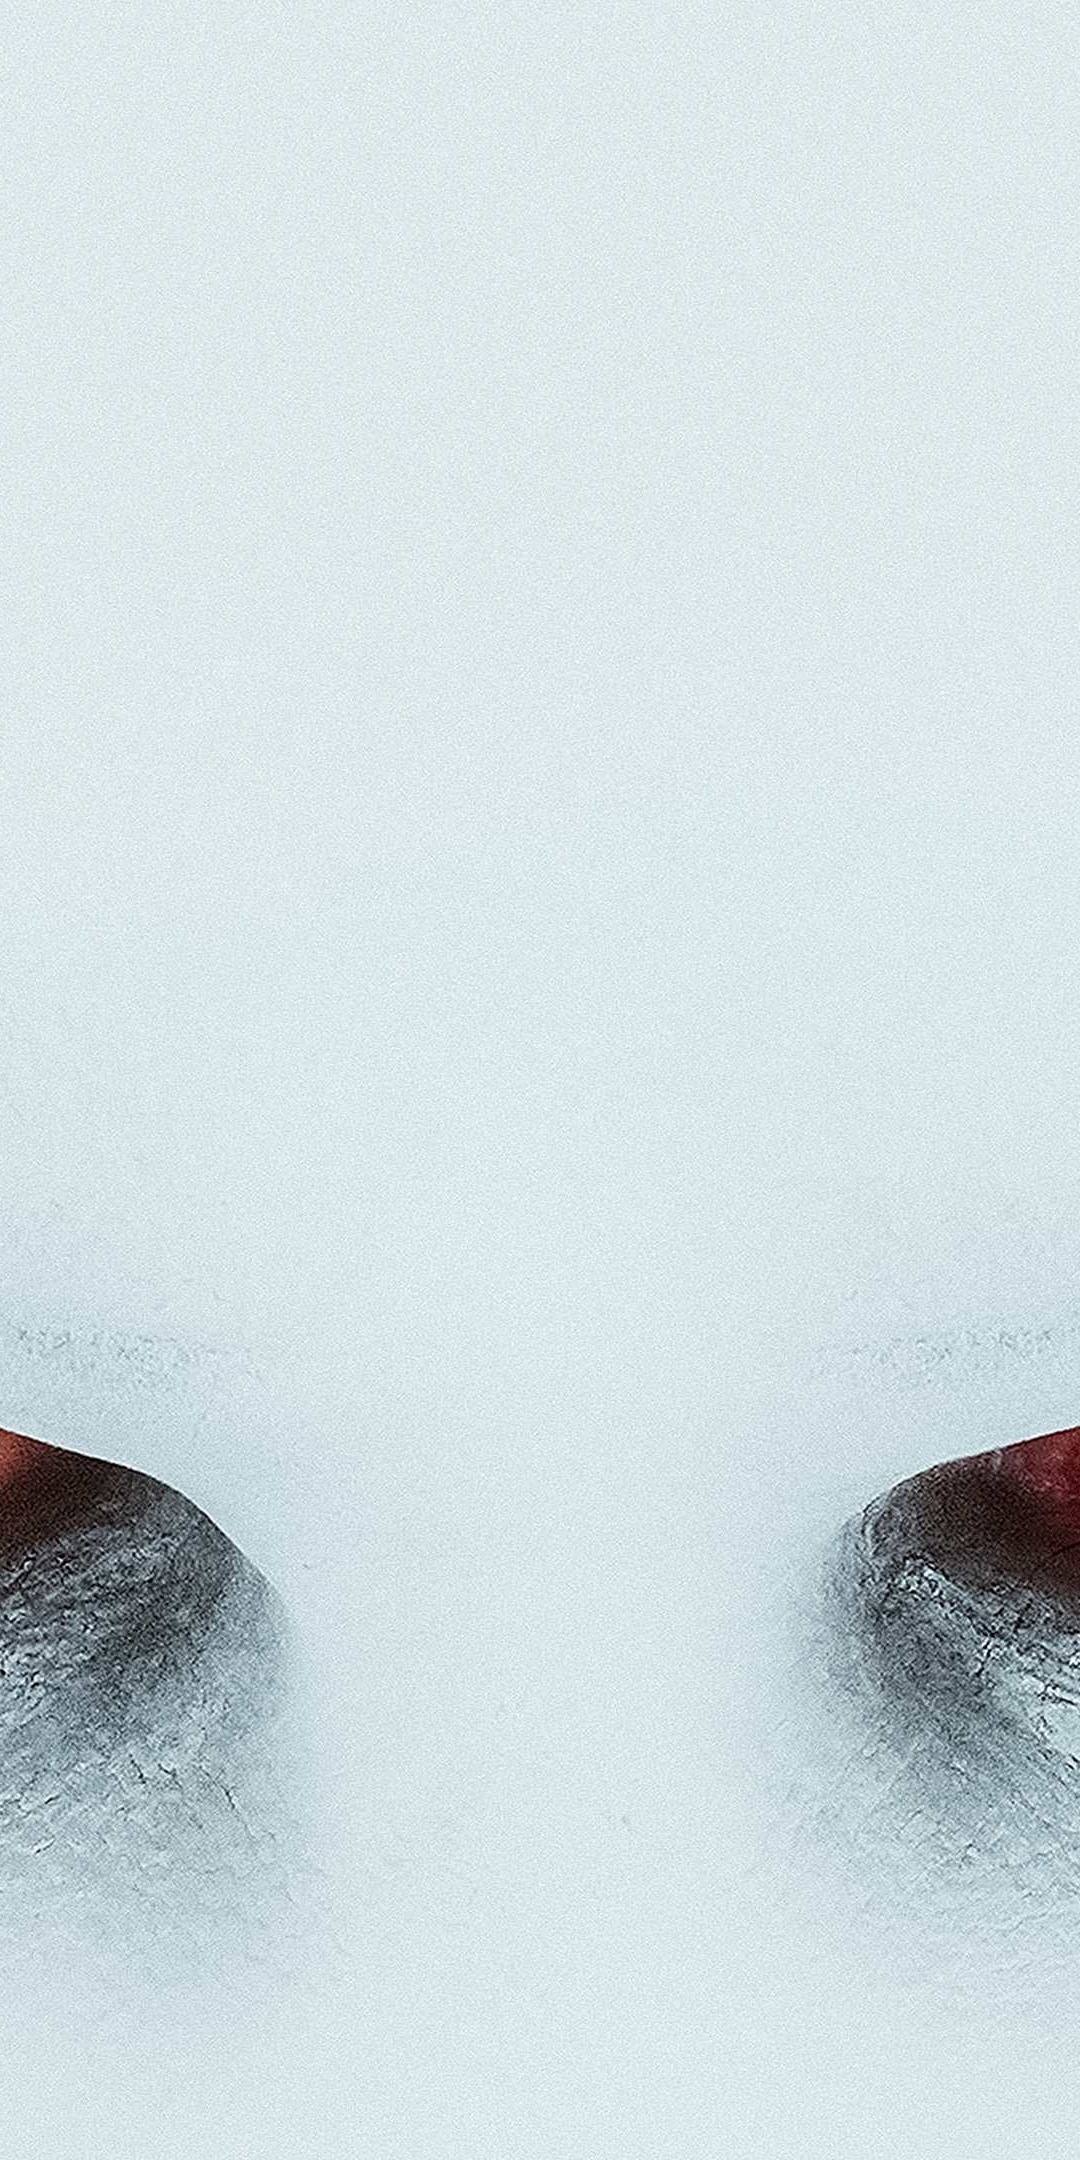 Hd Wallpaper For Mobile 1080 X 2160